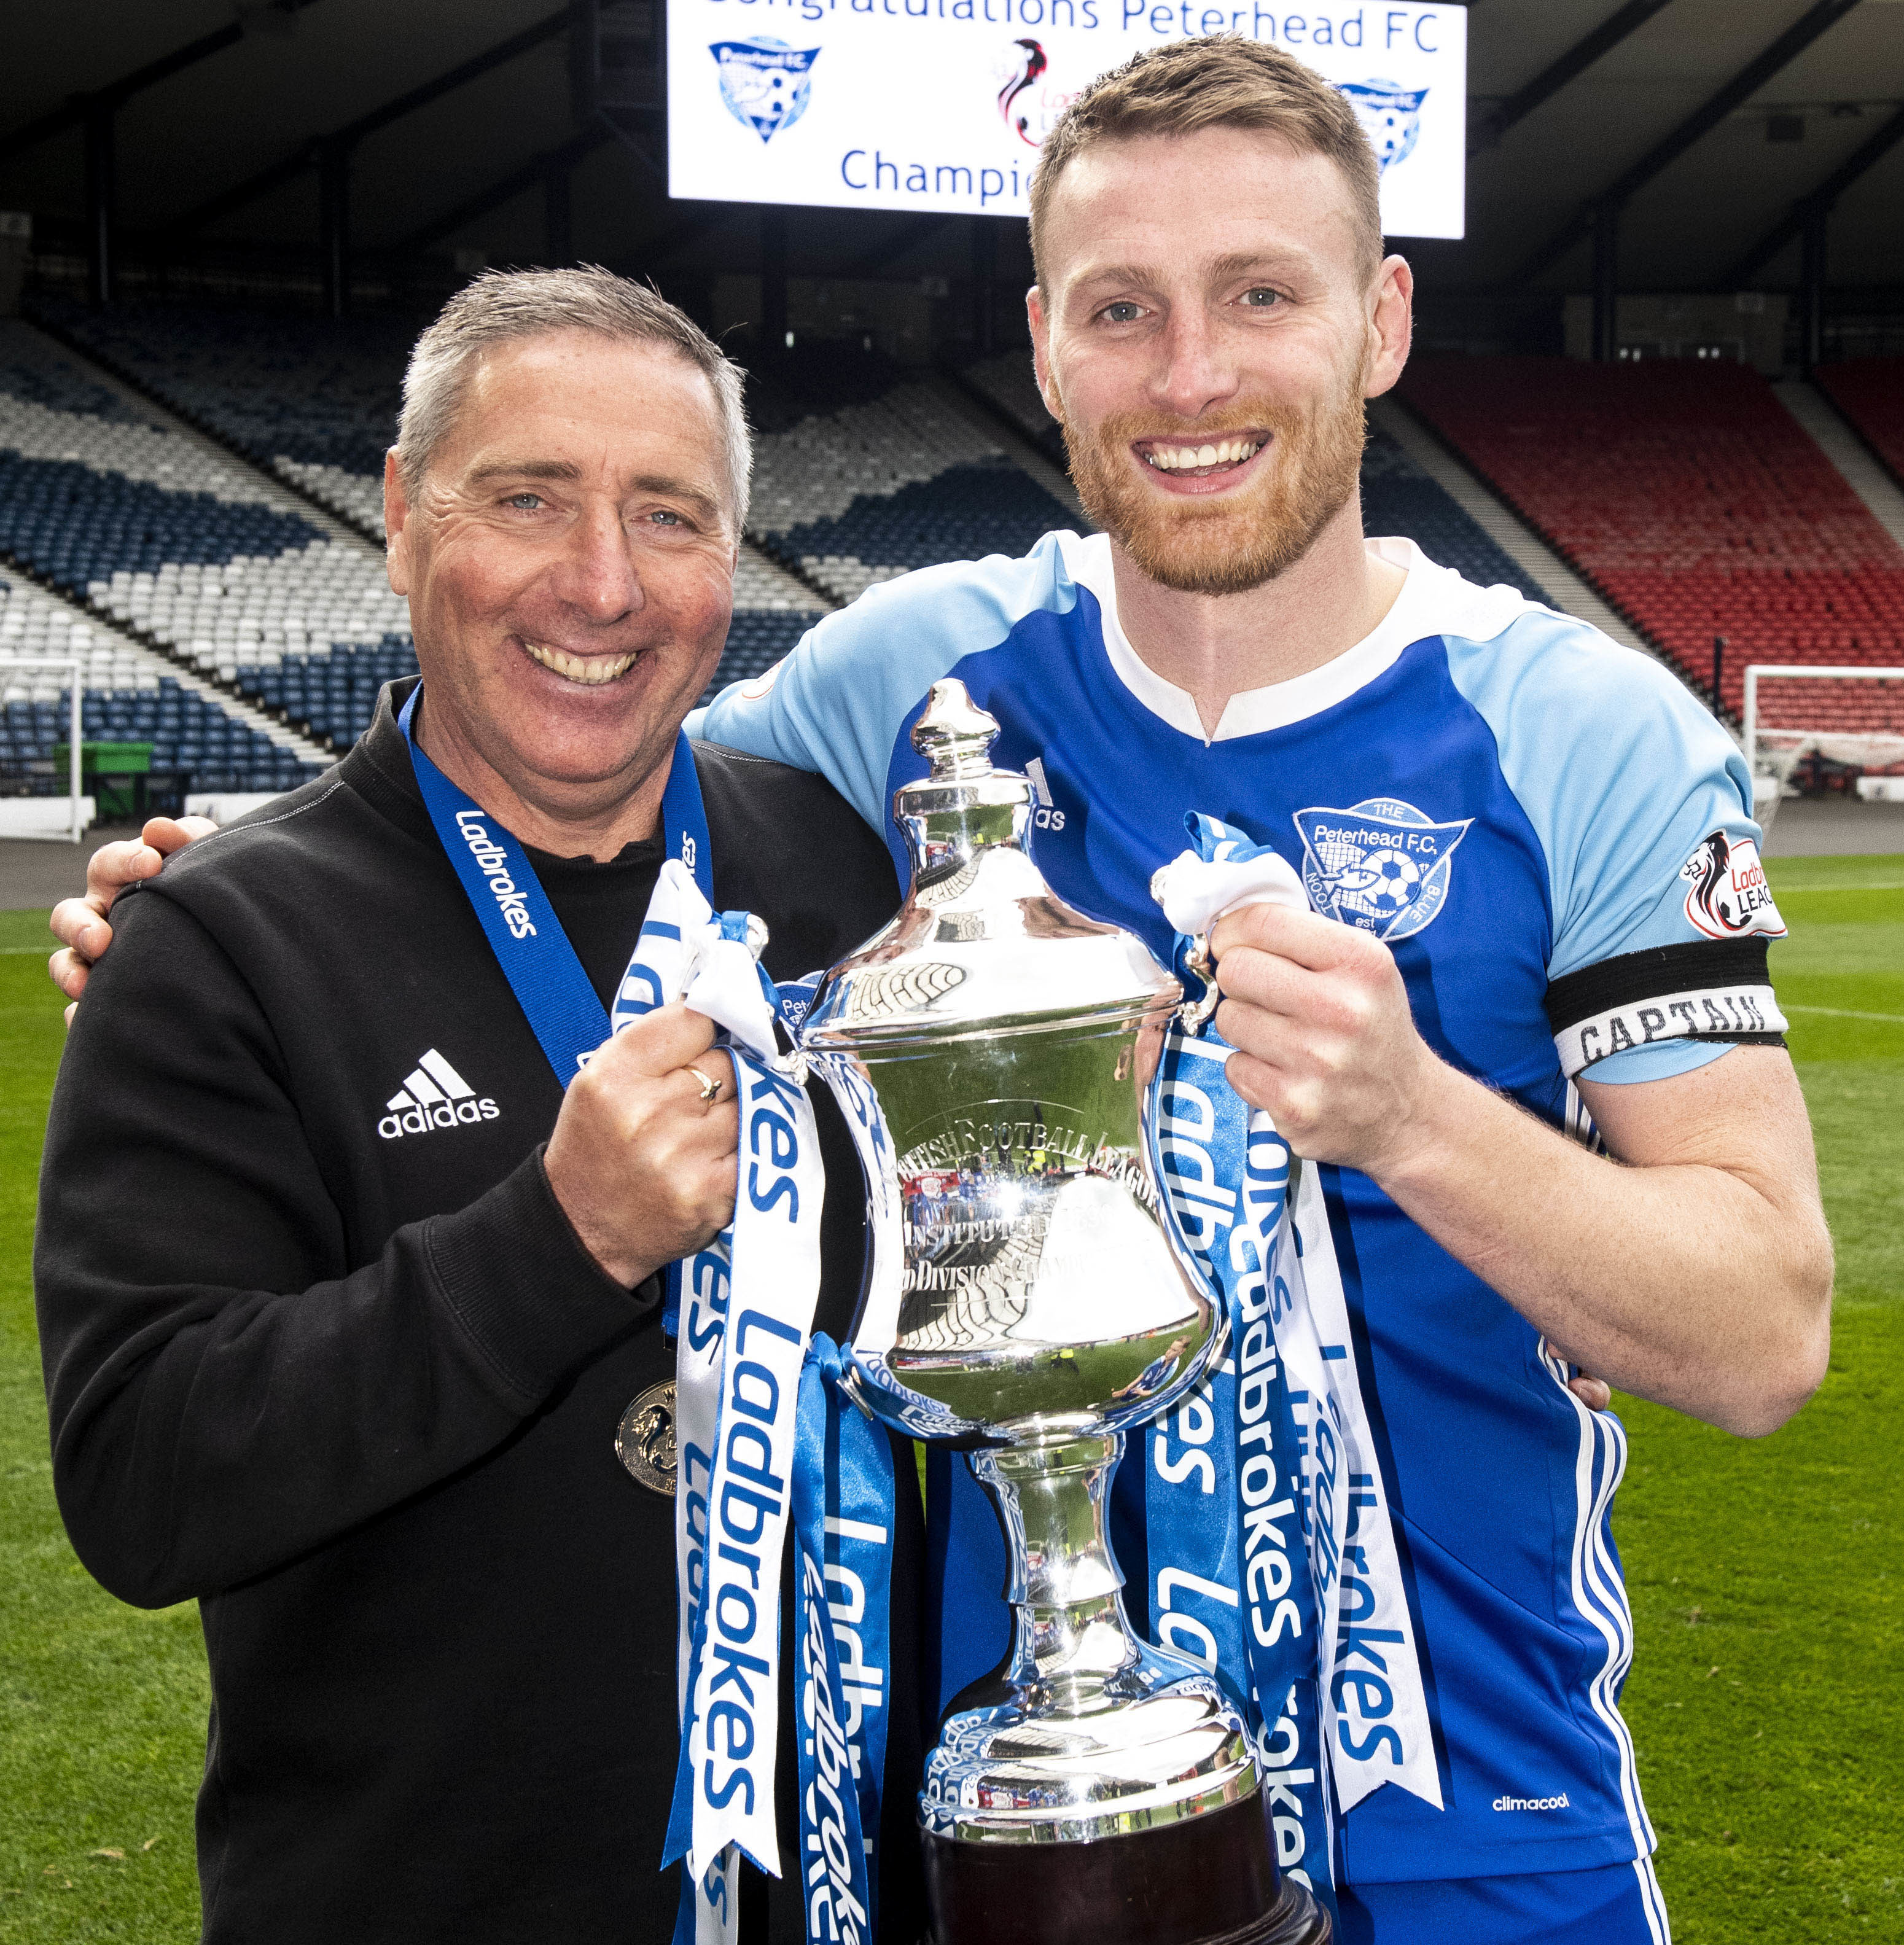 Peterhead manager Jim McInally and captain Rory McAllister.